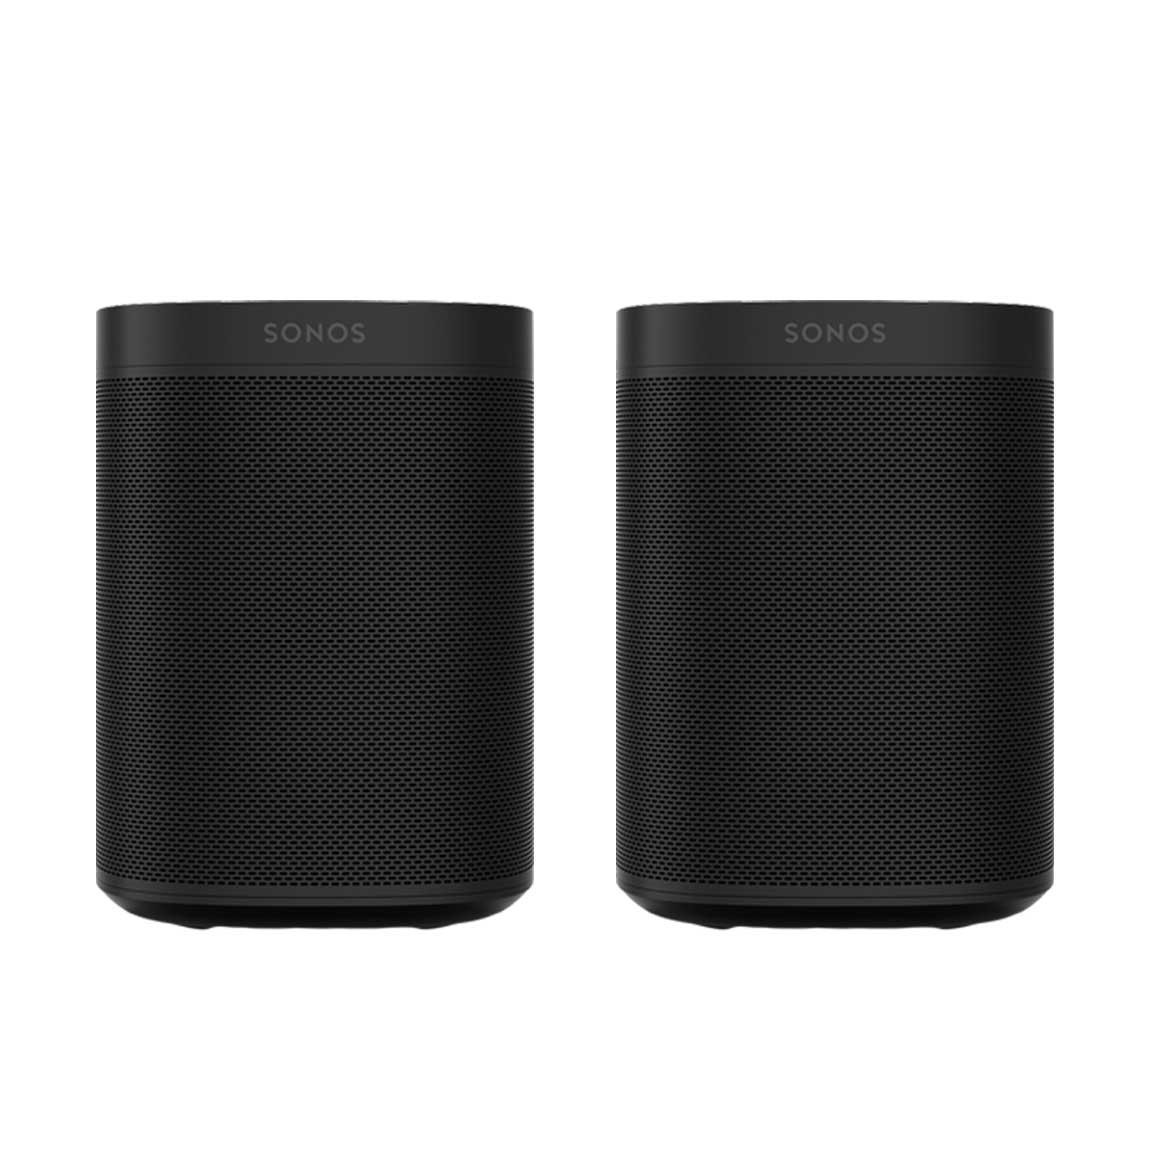 Goodwill linned fuzzy Köp Sonos One Stereo Set - Wifi speakers online | tink